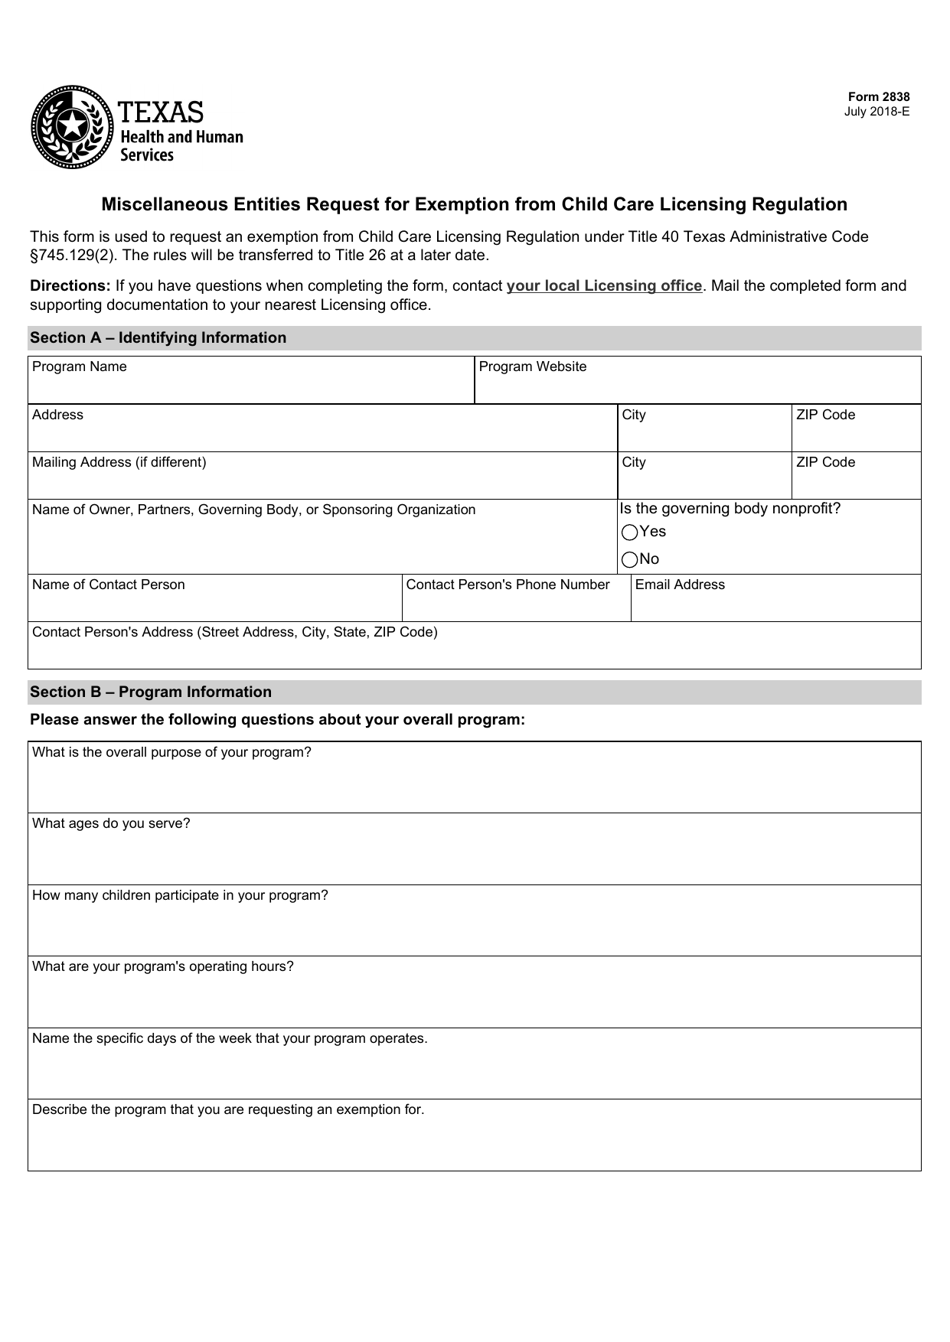 Form 2838 Miscellaneous Entities Request for Exemption From Child Care Licensing Regulation - Texas, Page 1